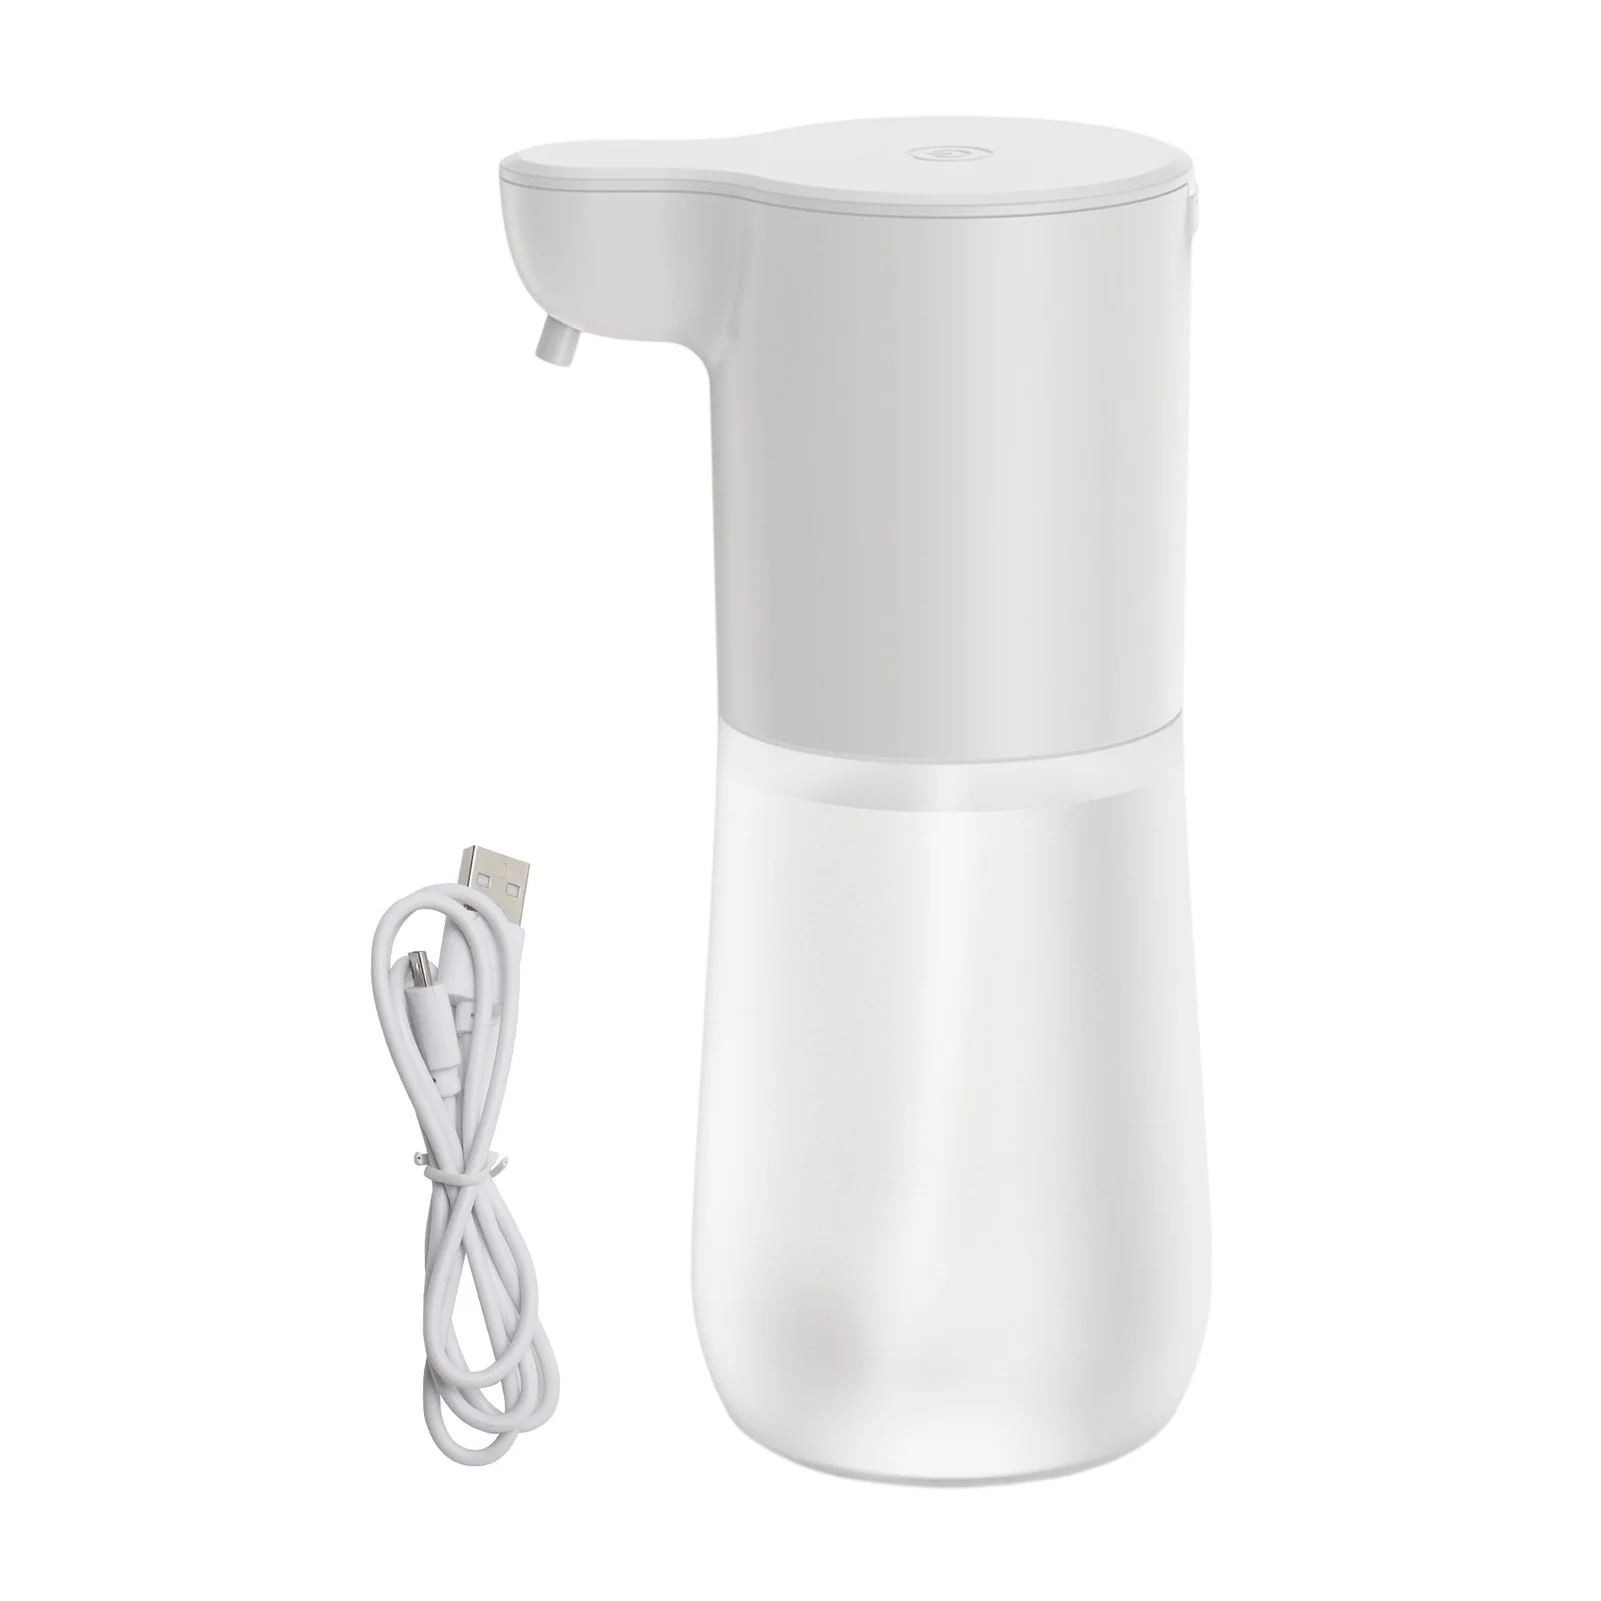 

600ml Hand Washer Bathrooms Cleaning Automatic Induction Wall Mounting Waterproof Home Soap Dispenser Touch Free With Sensor